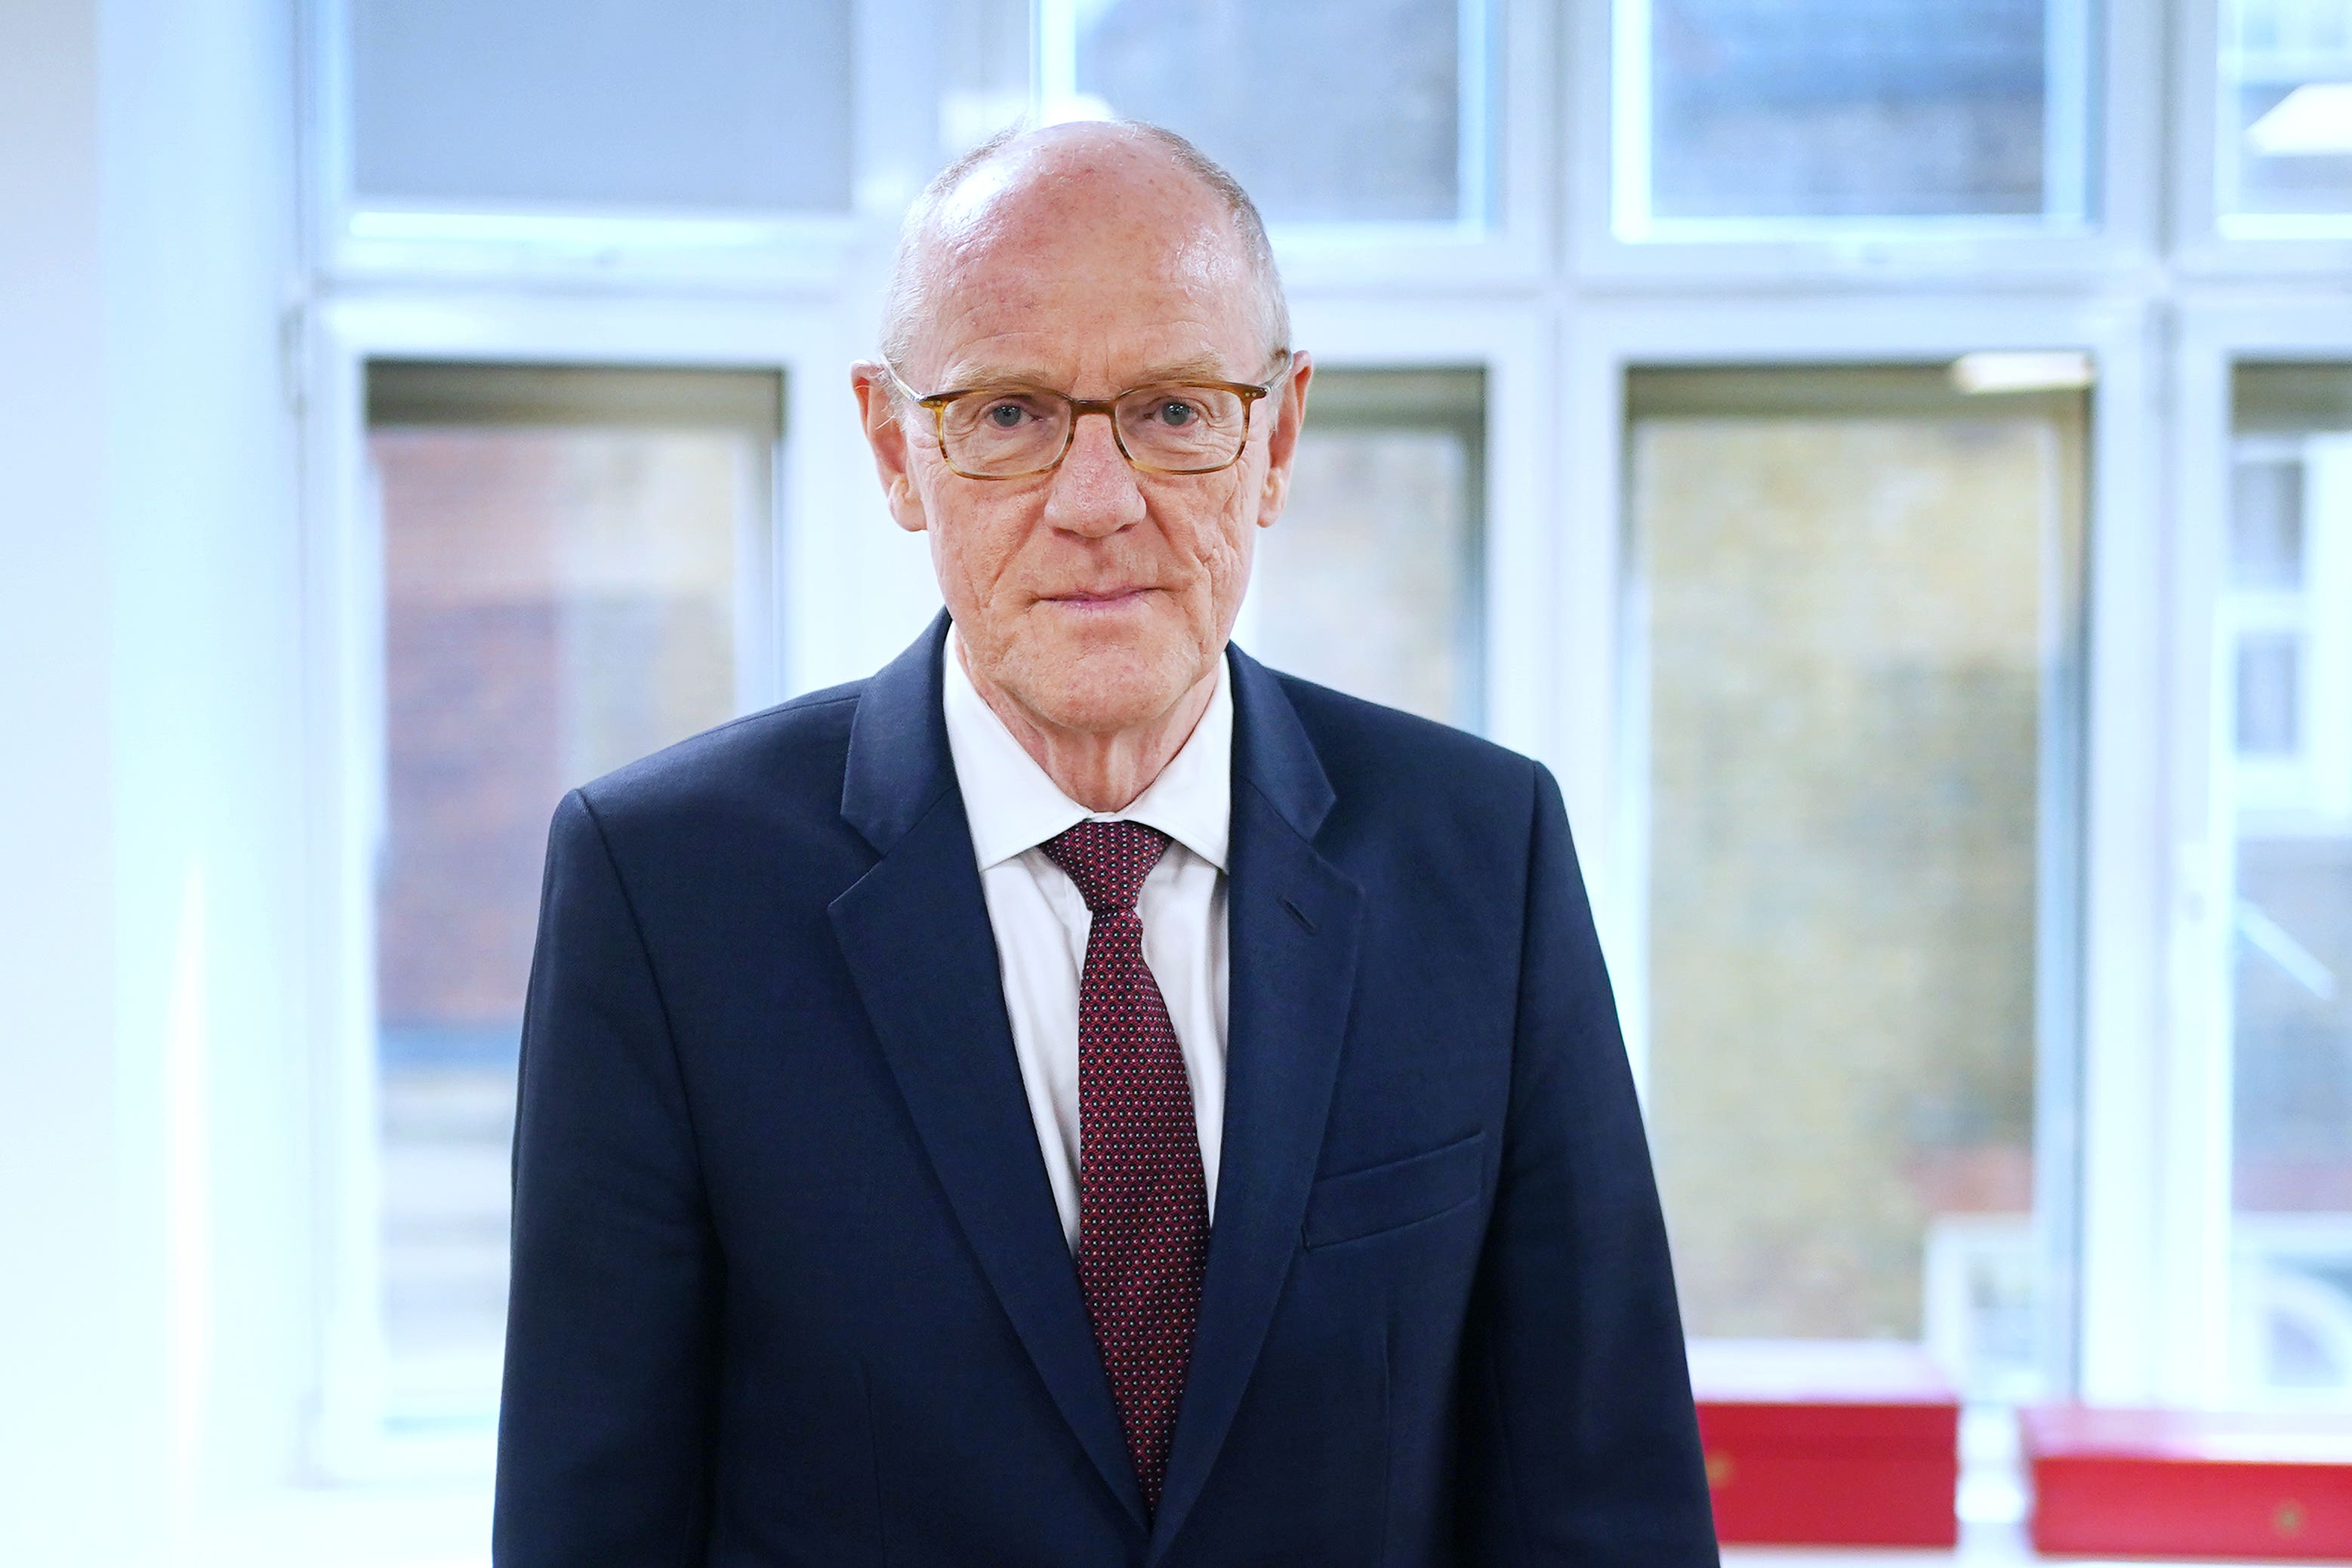 Schools minister Nick Gibb said the Tory government’s response was ‘world leading’